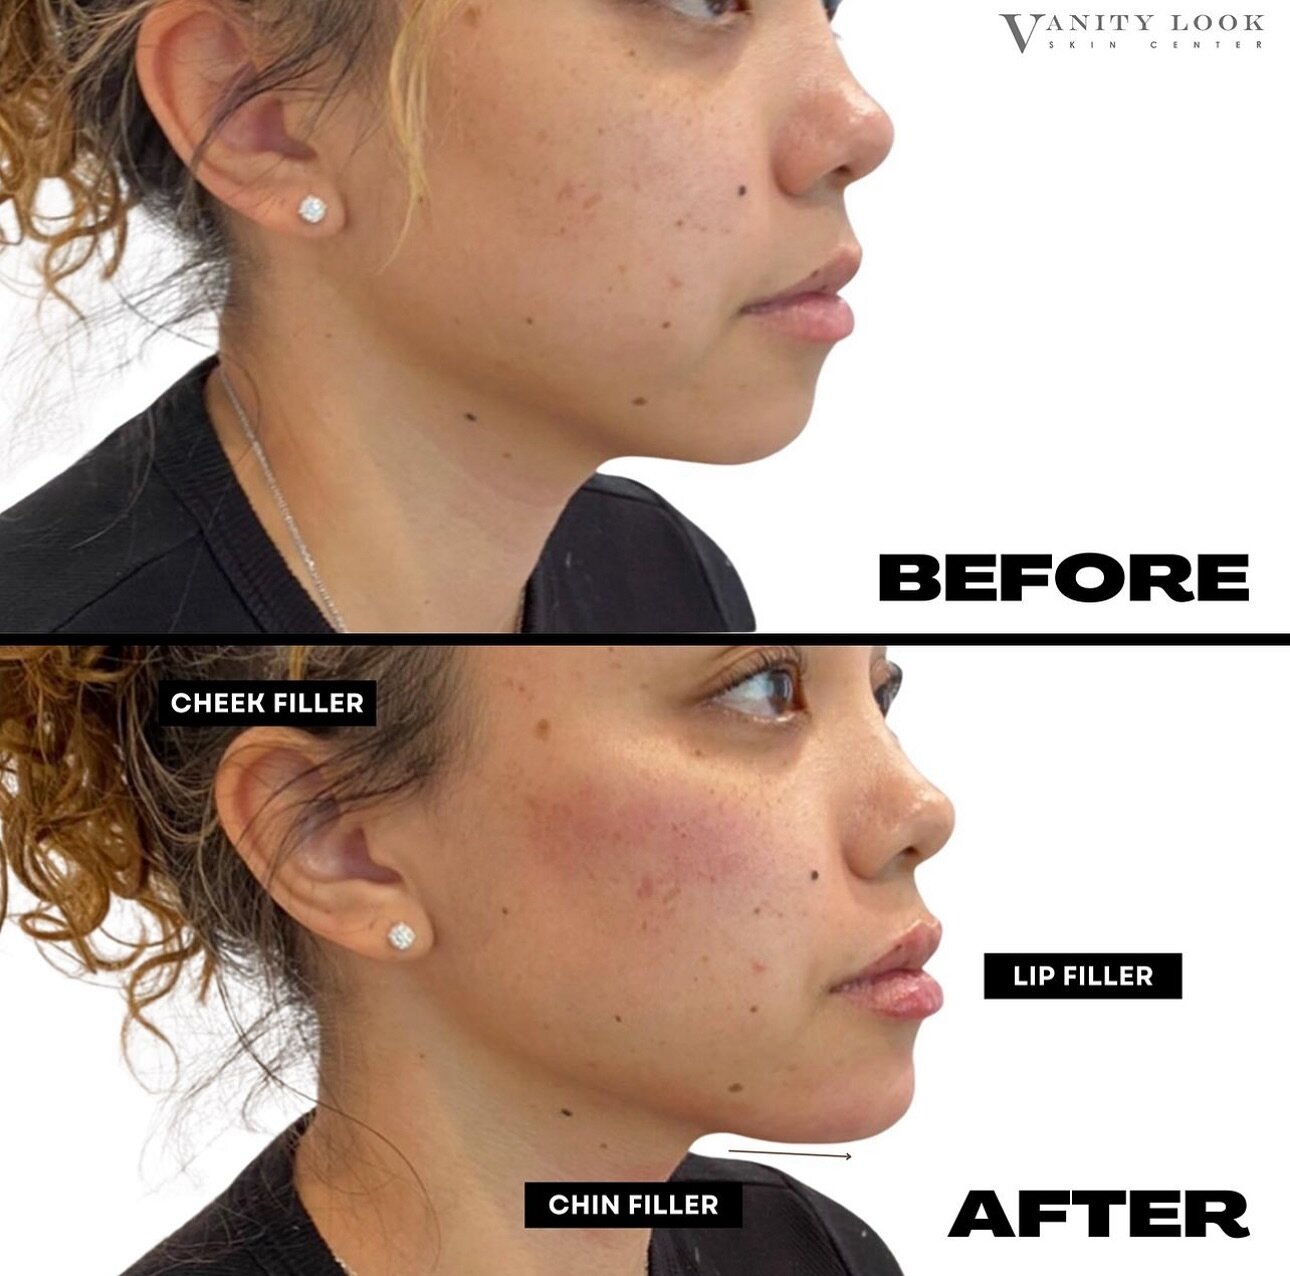 SIDE PROFILE ENHANCEMENT 💉👄 We enhanced her side profile in 15 minutes with no downtime. What do you think of this result?

Call us at (818) 290-3938 to book an appointment with one of our expert injectors! 📞✨

☎️: (818) 290-3938
💻 : Vanitylooksk